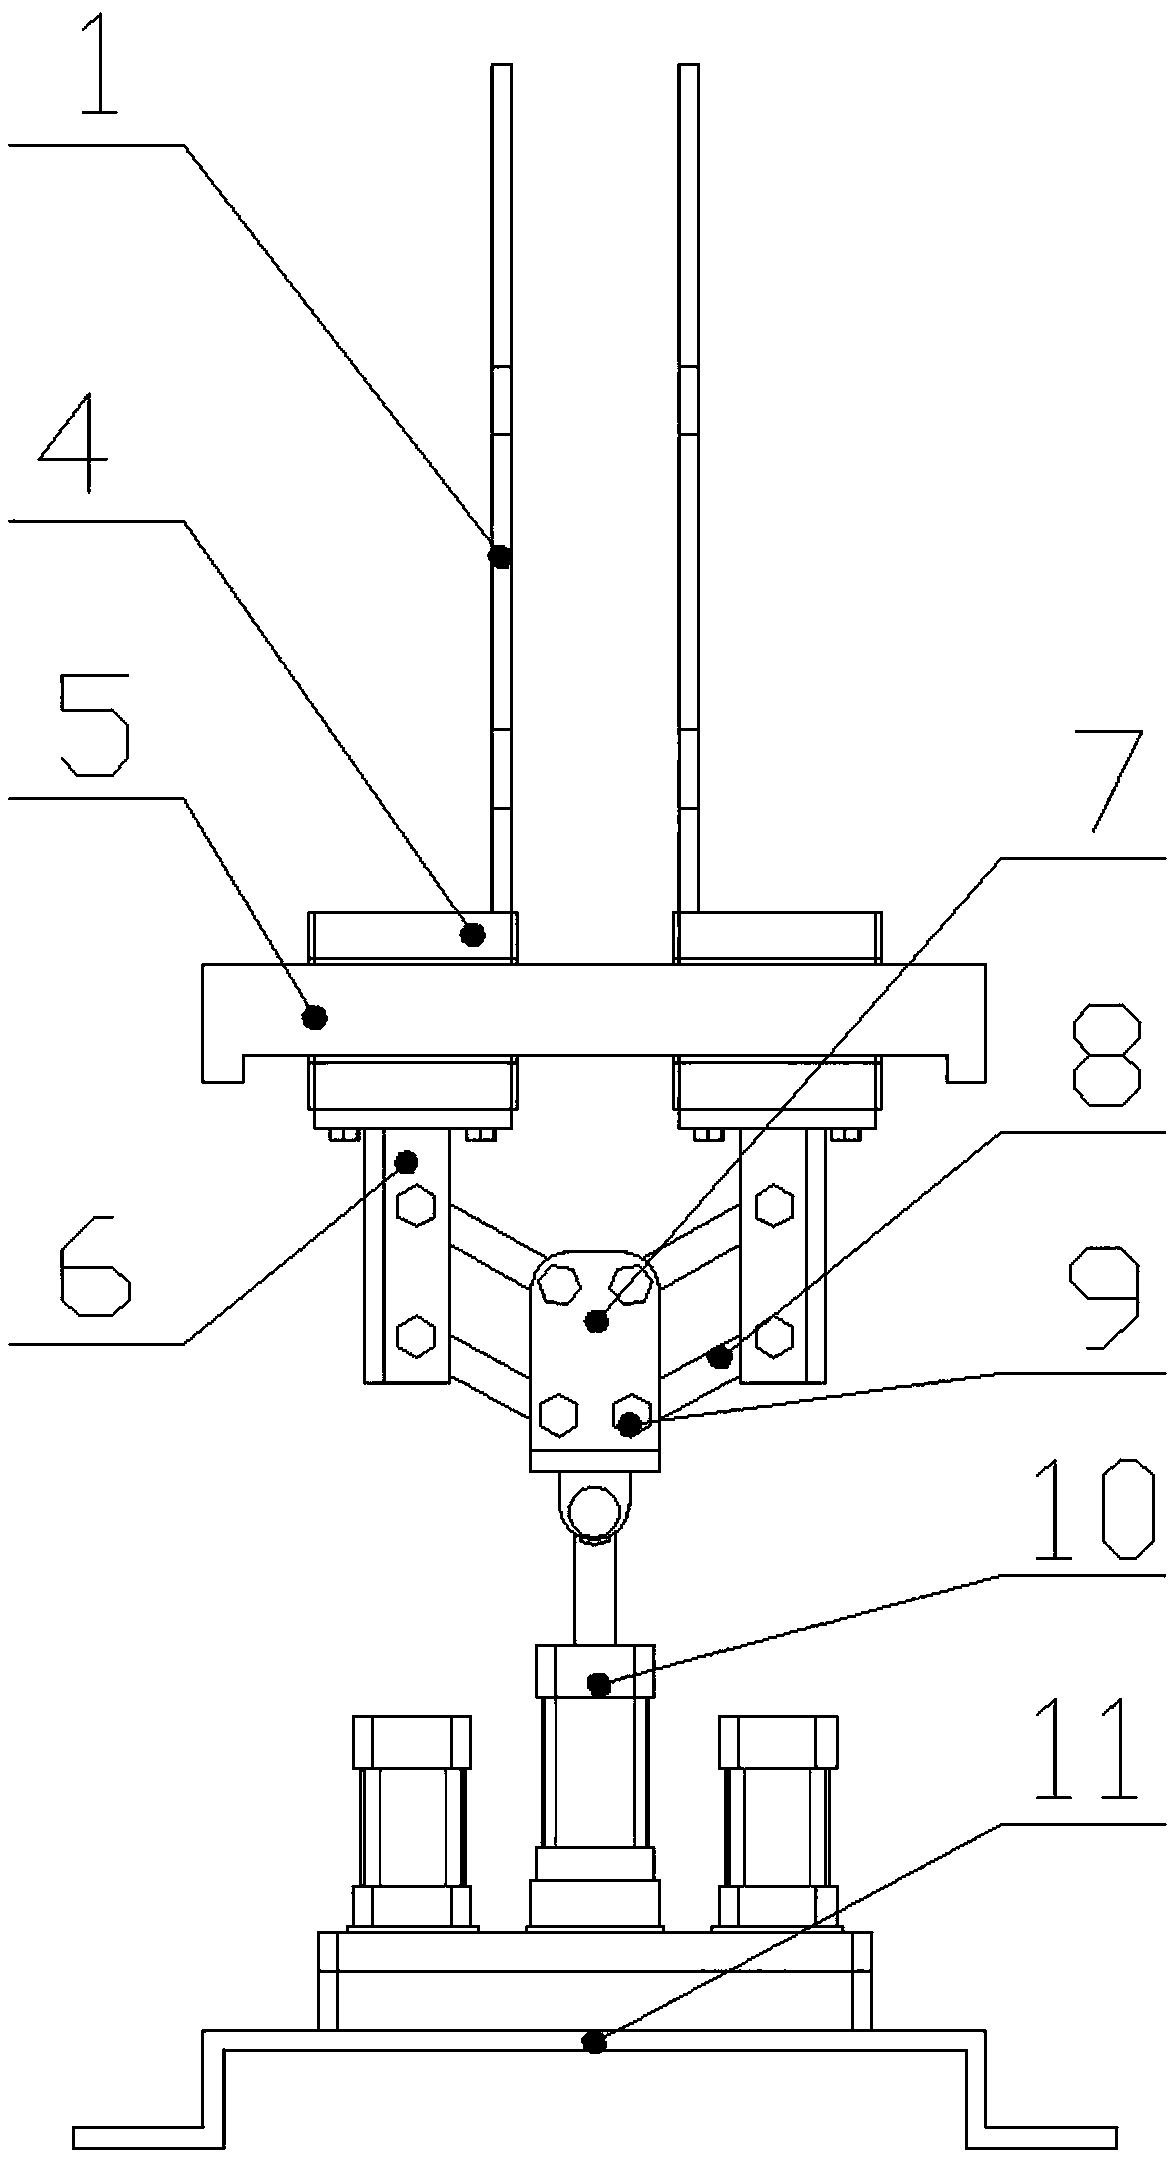 Parallel clamping manipulator device